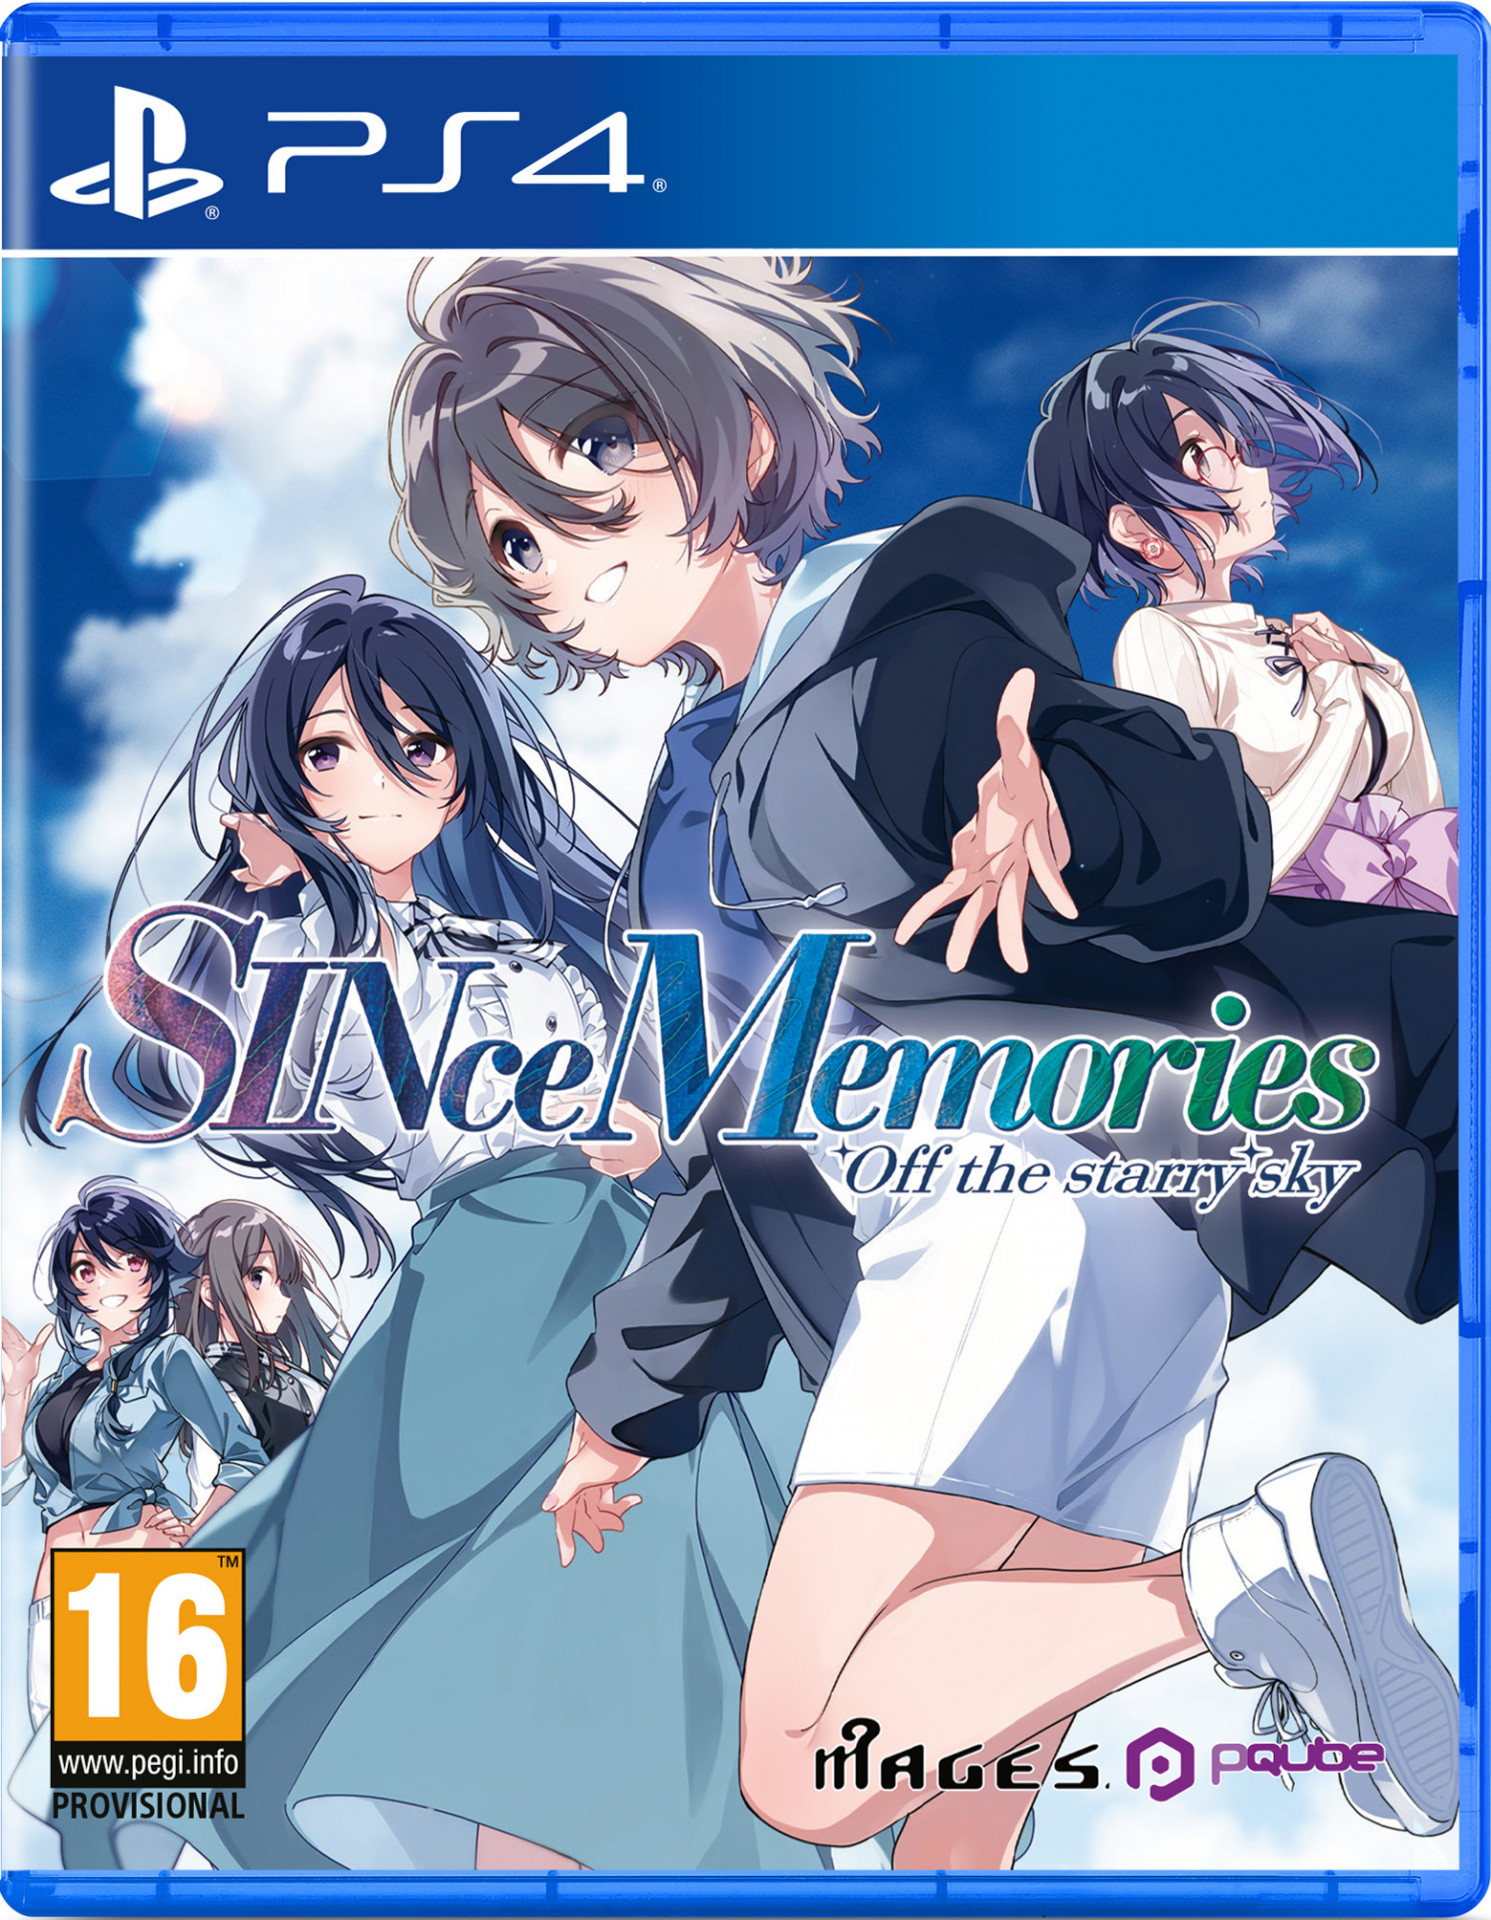 SINce Memories: Off the Starry Sky (PS4), Pqube